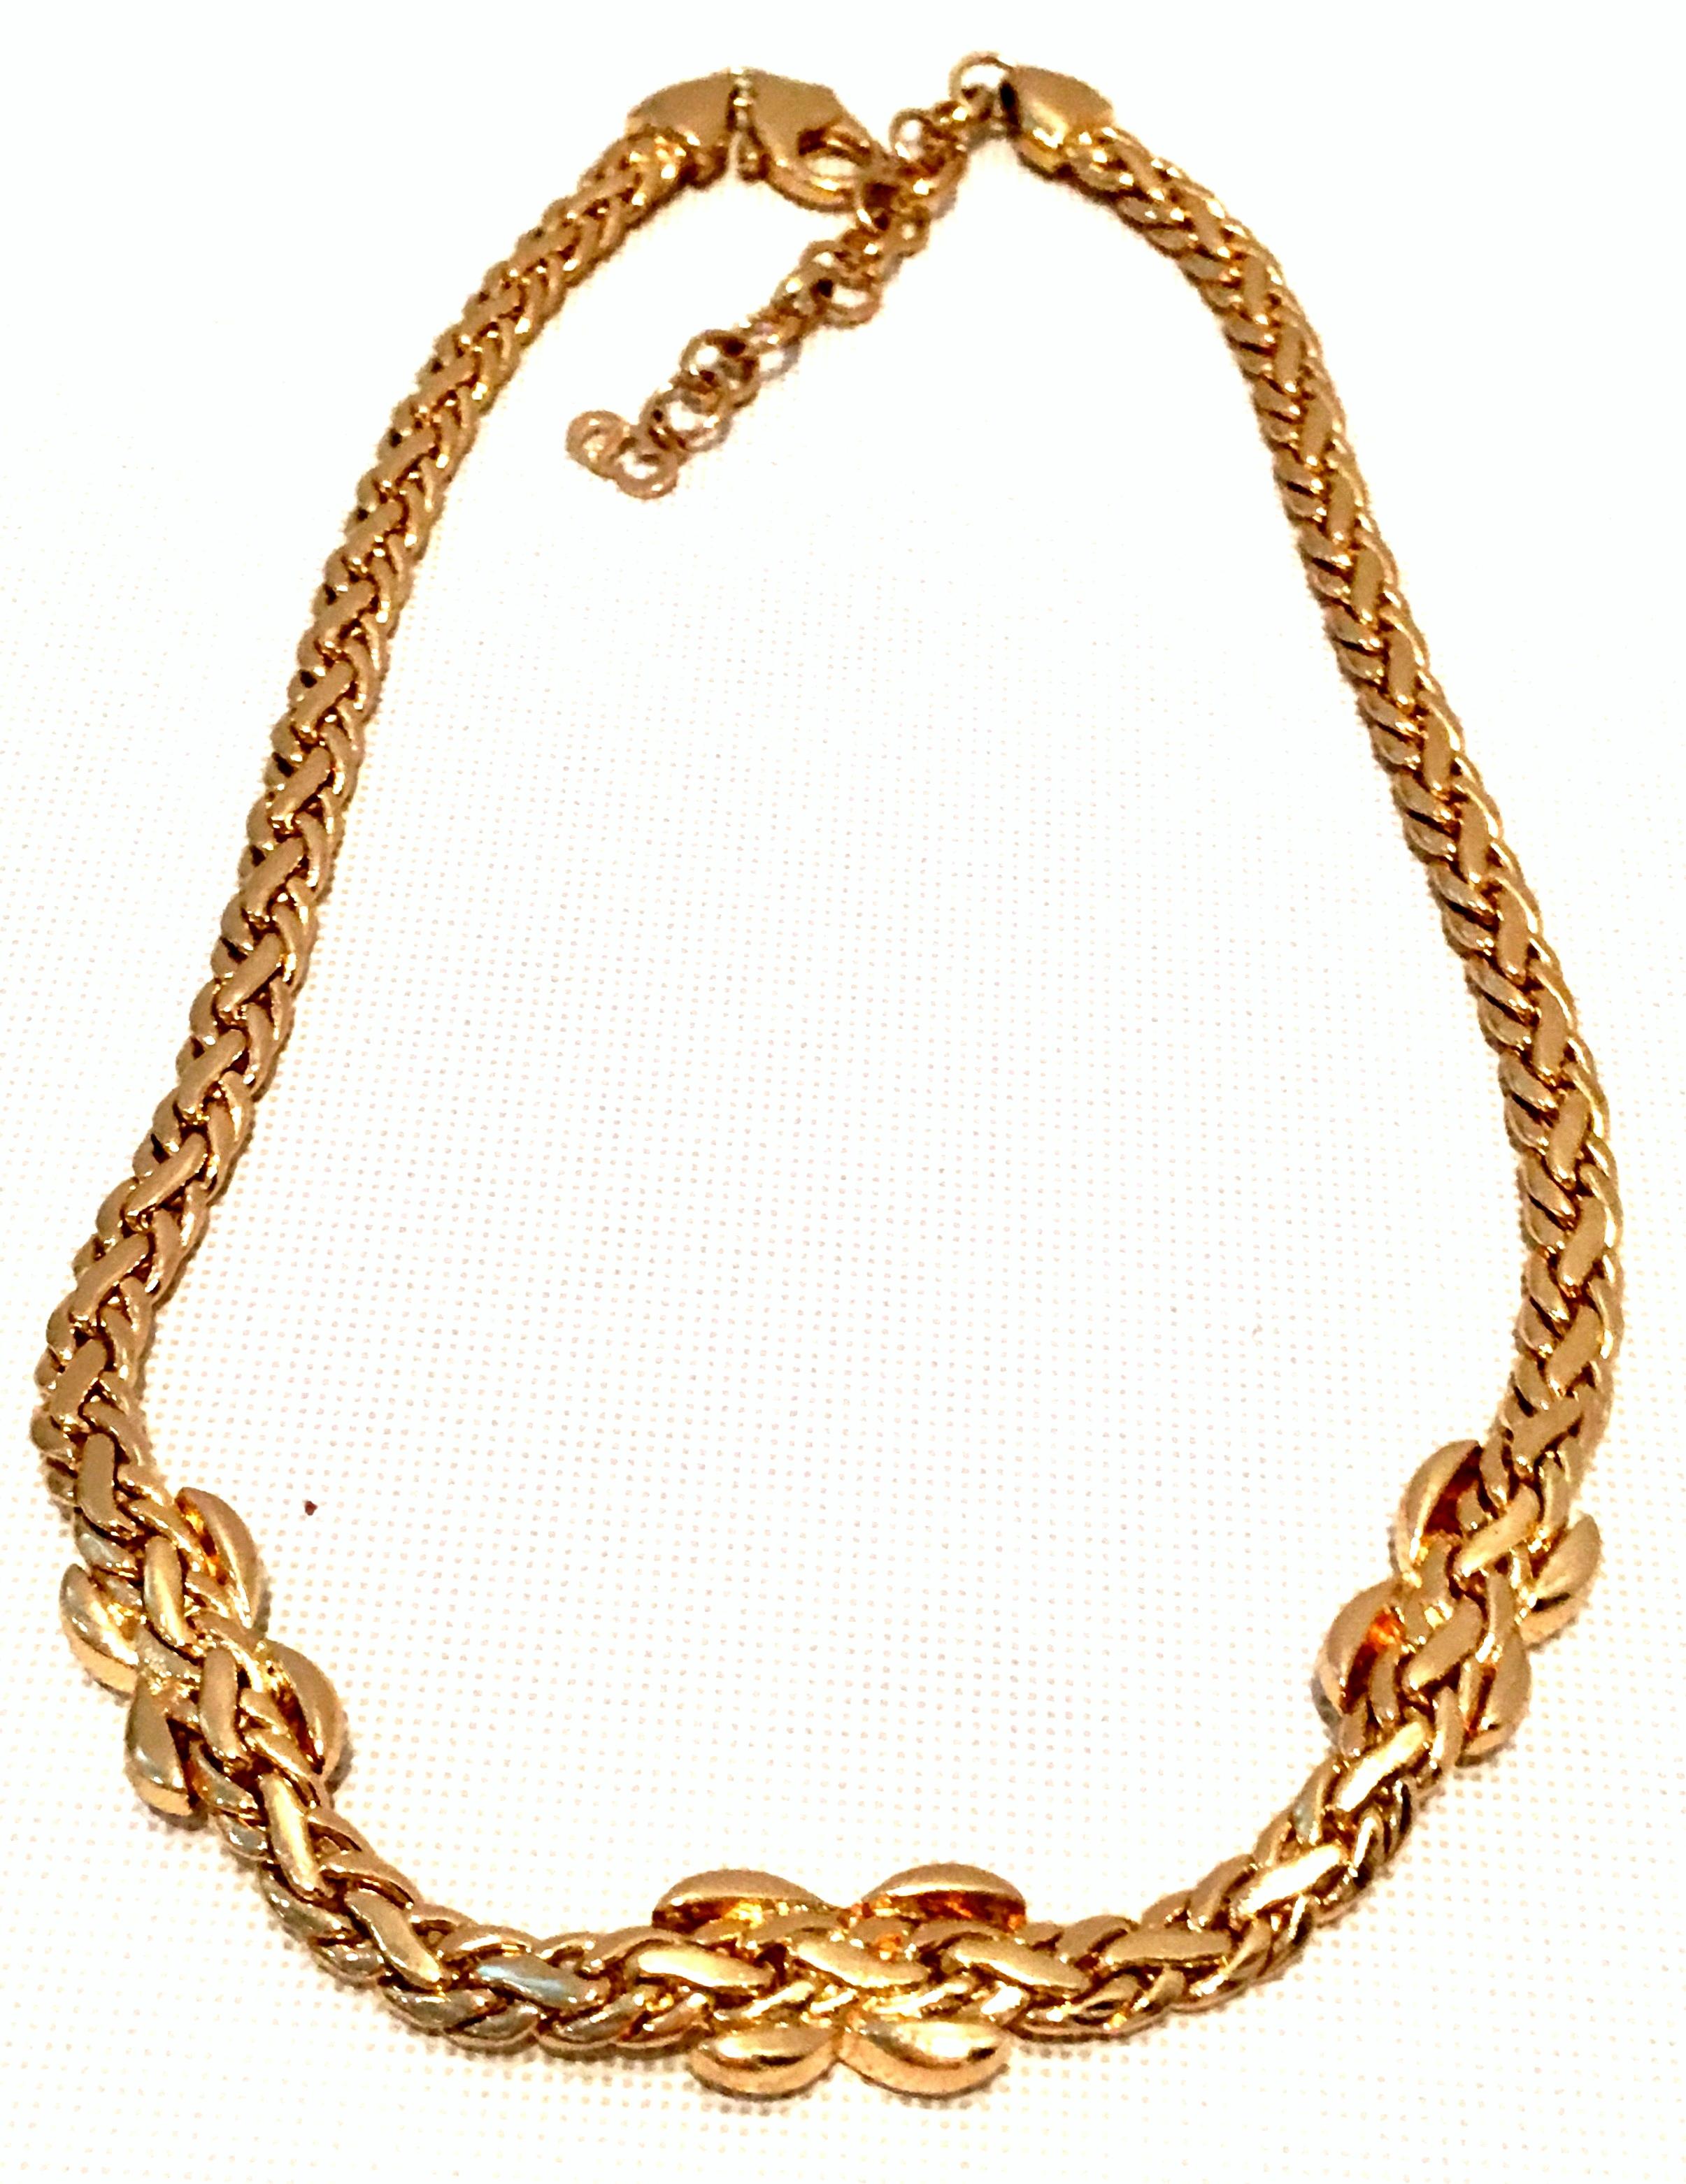 Women's or Men's 20th Century Gold & Swaorovski Crystal Choker Style Necklace By, Christian Dior